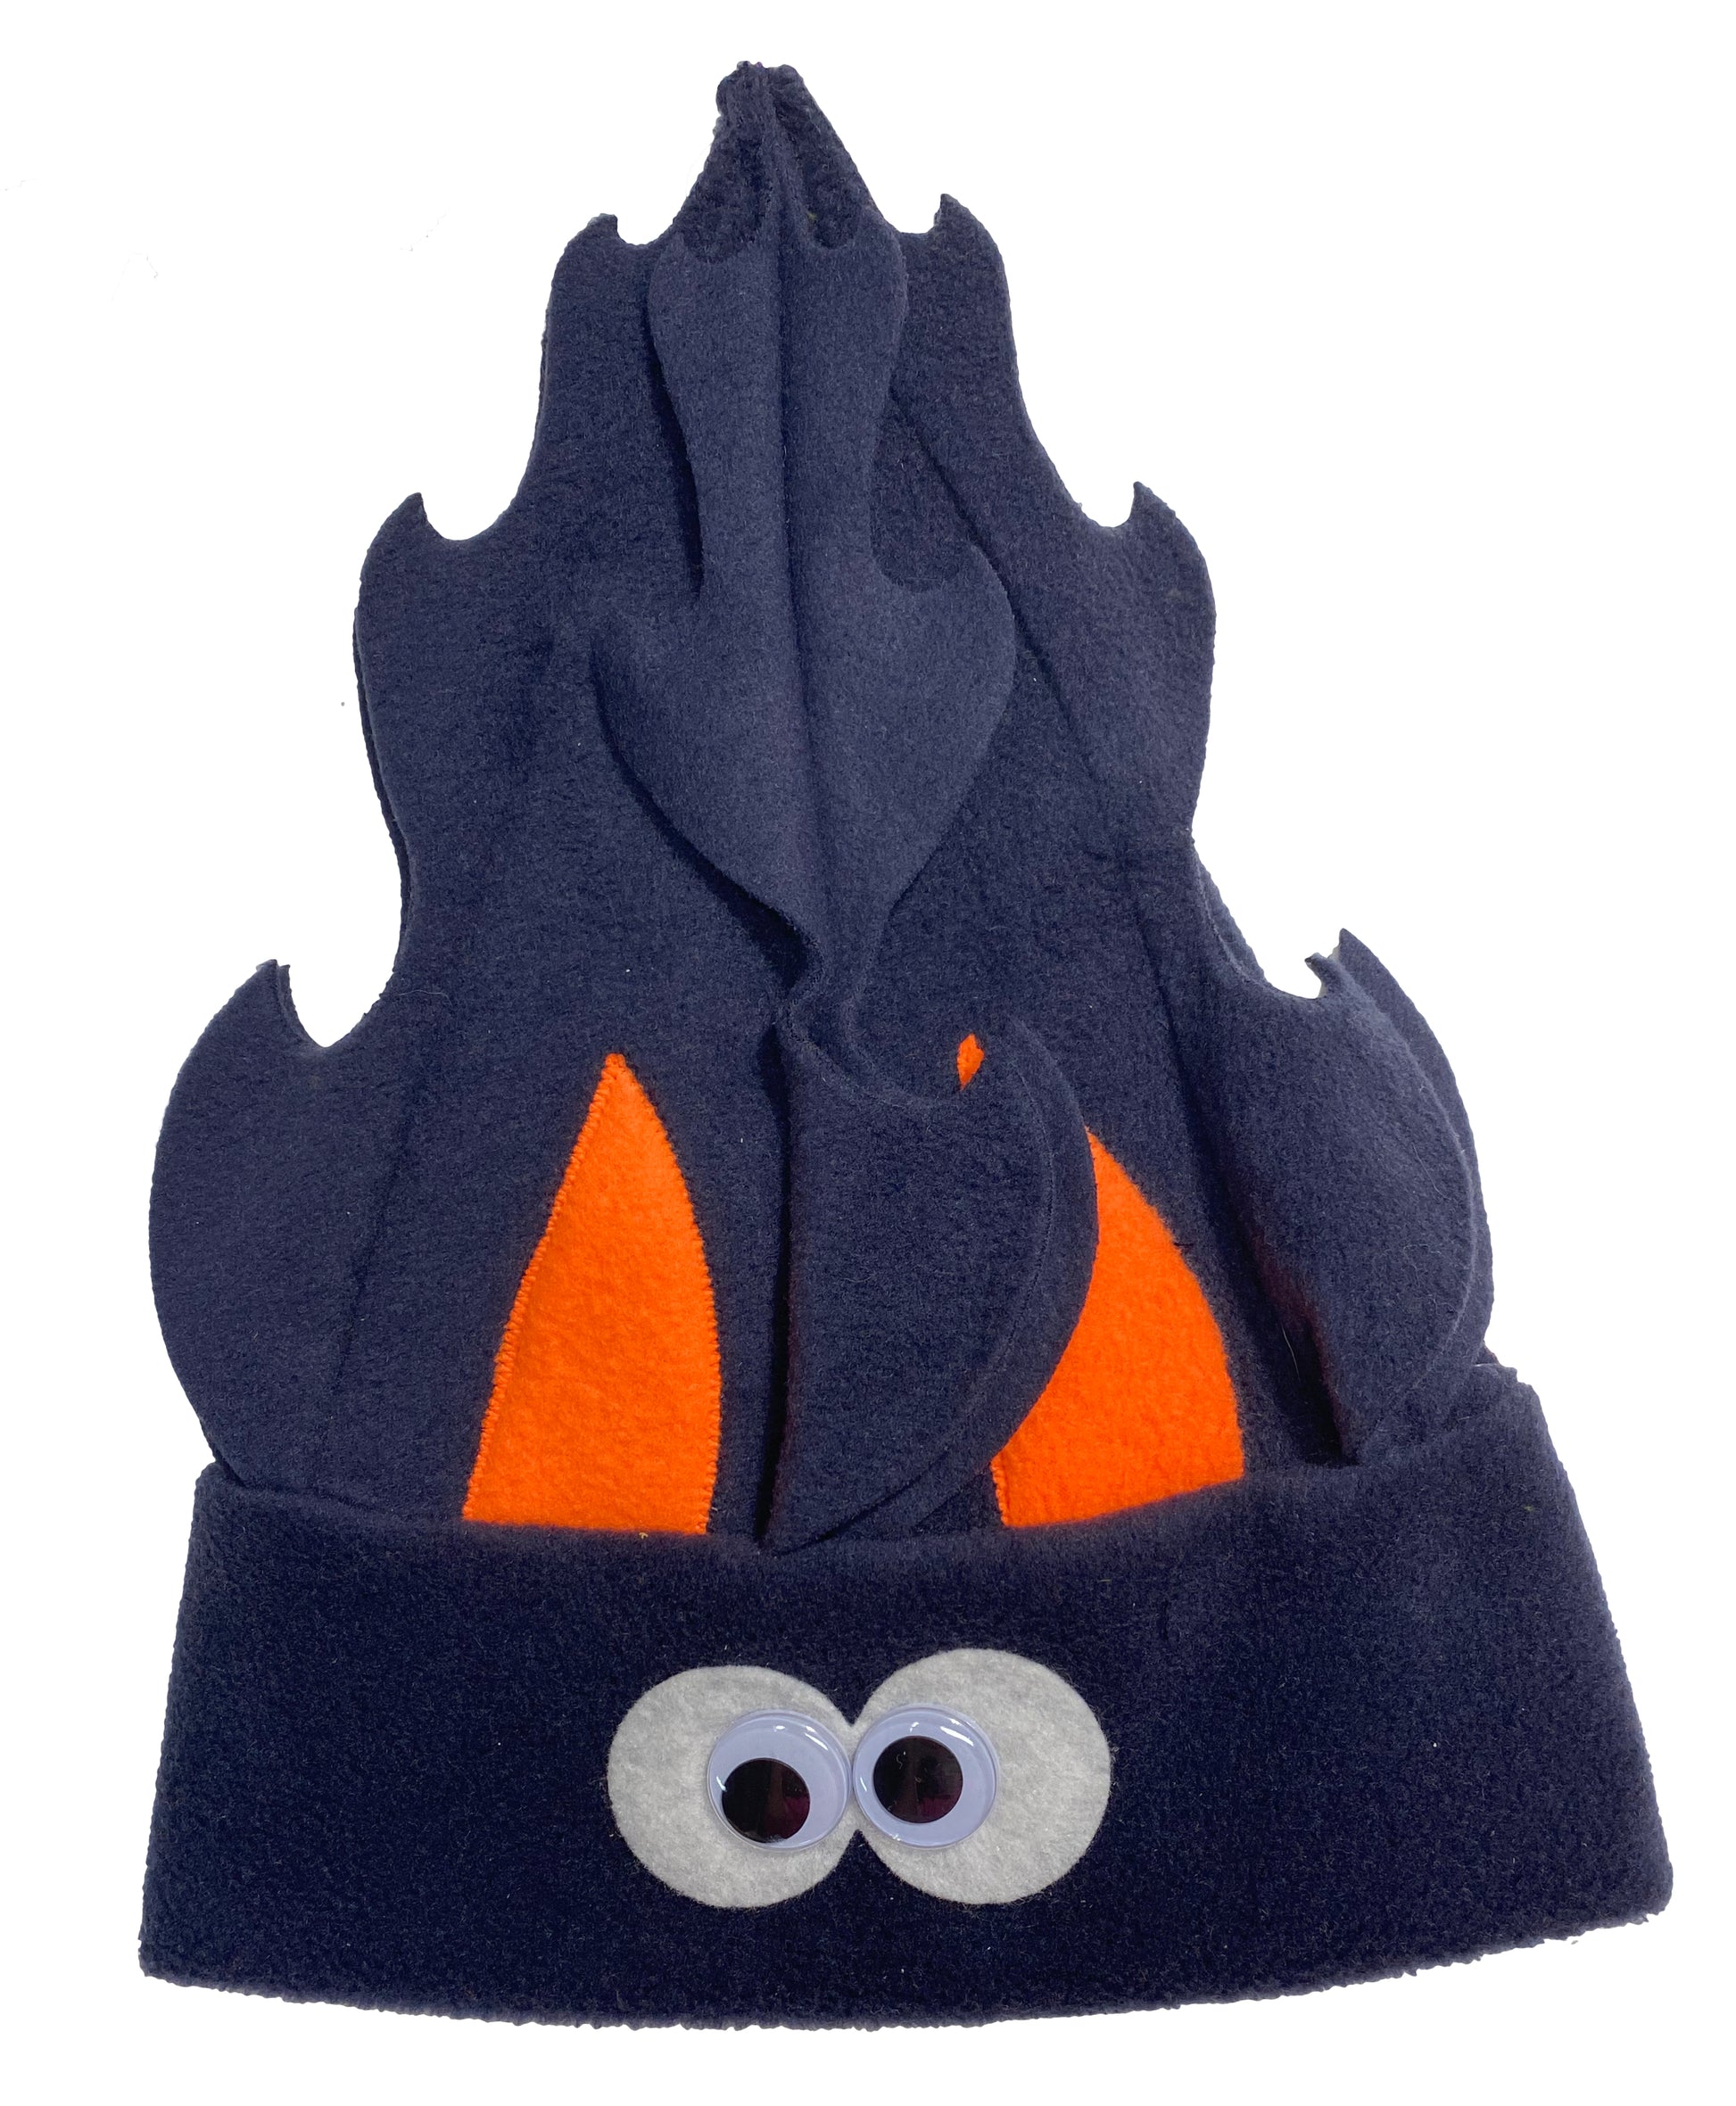 Fire Hats - Small - Fits heads up to 20" - Brainchild Designs